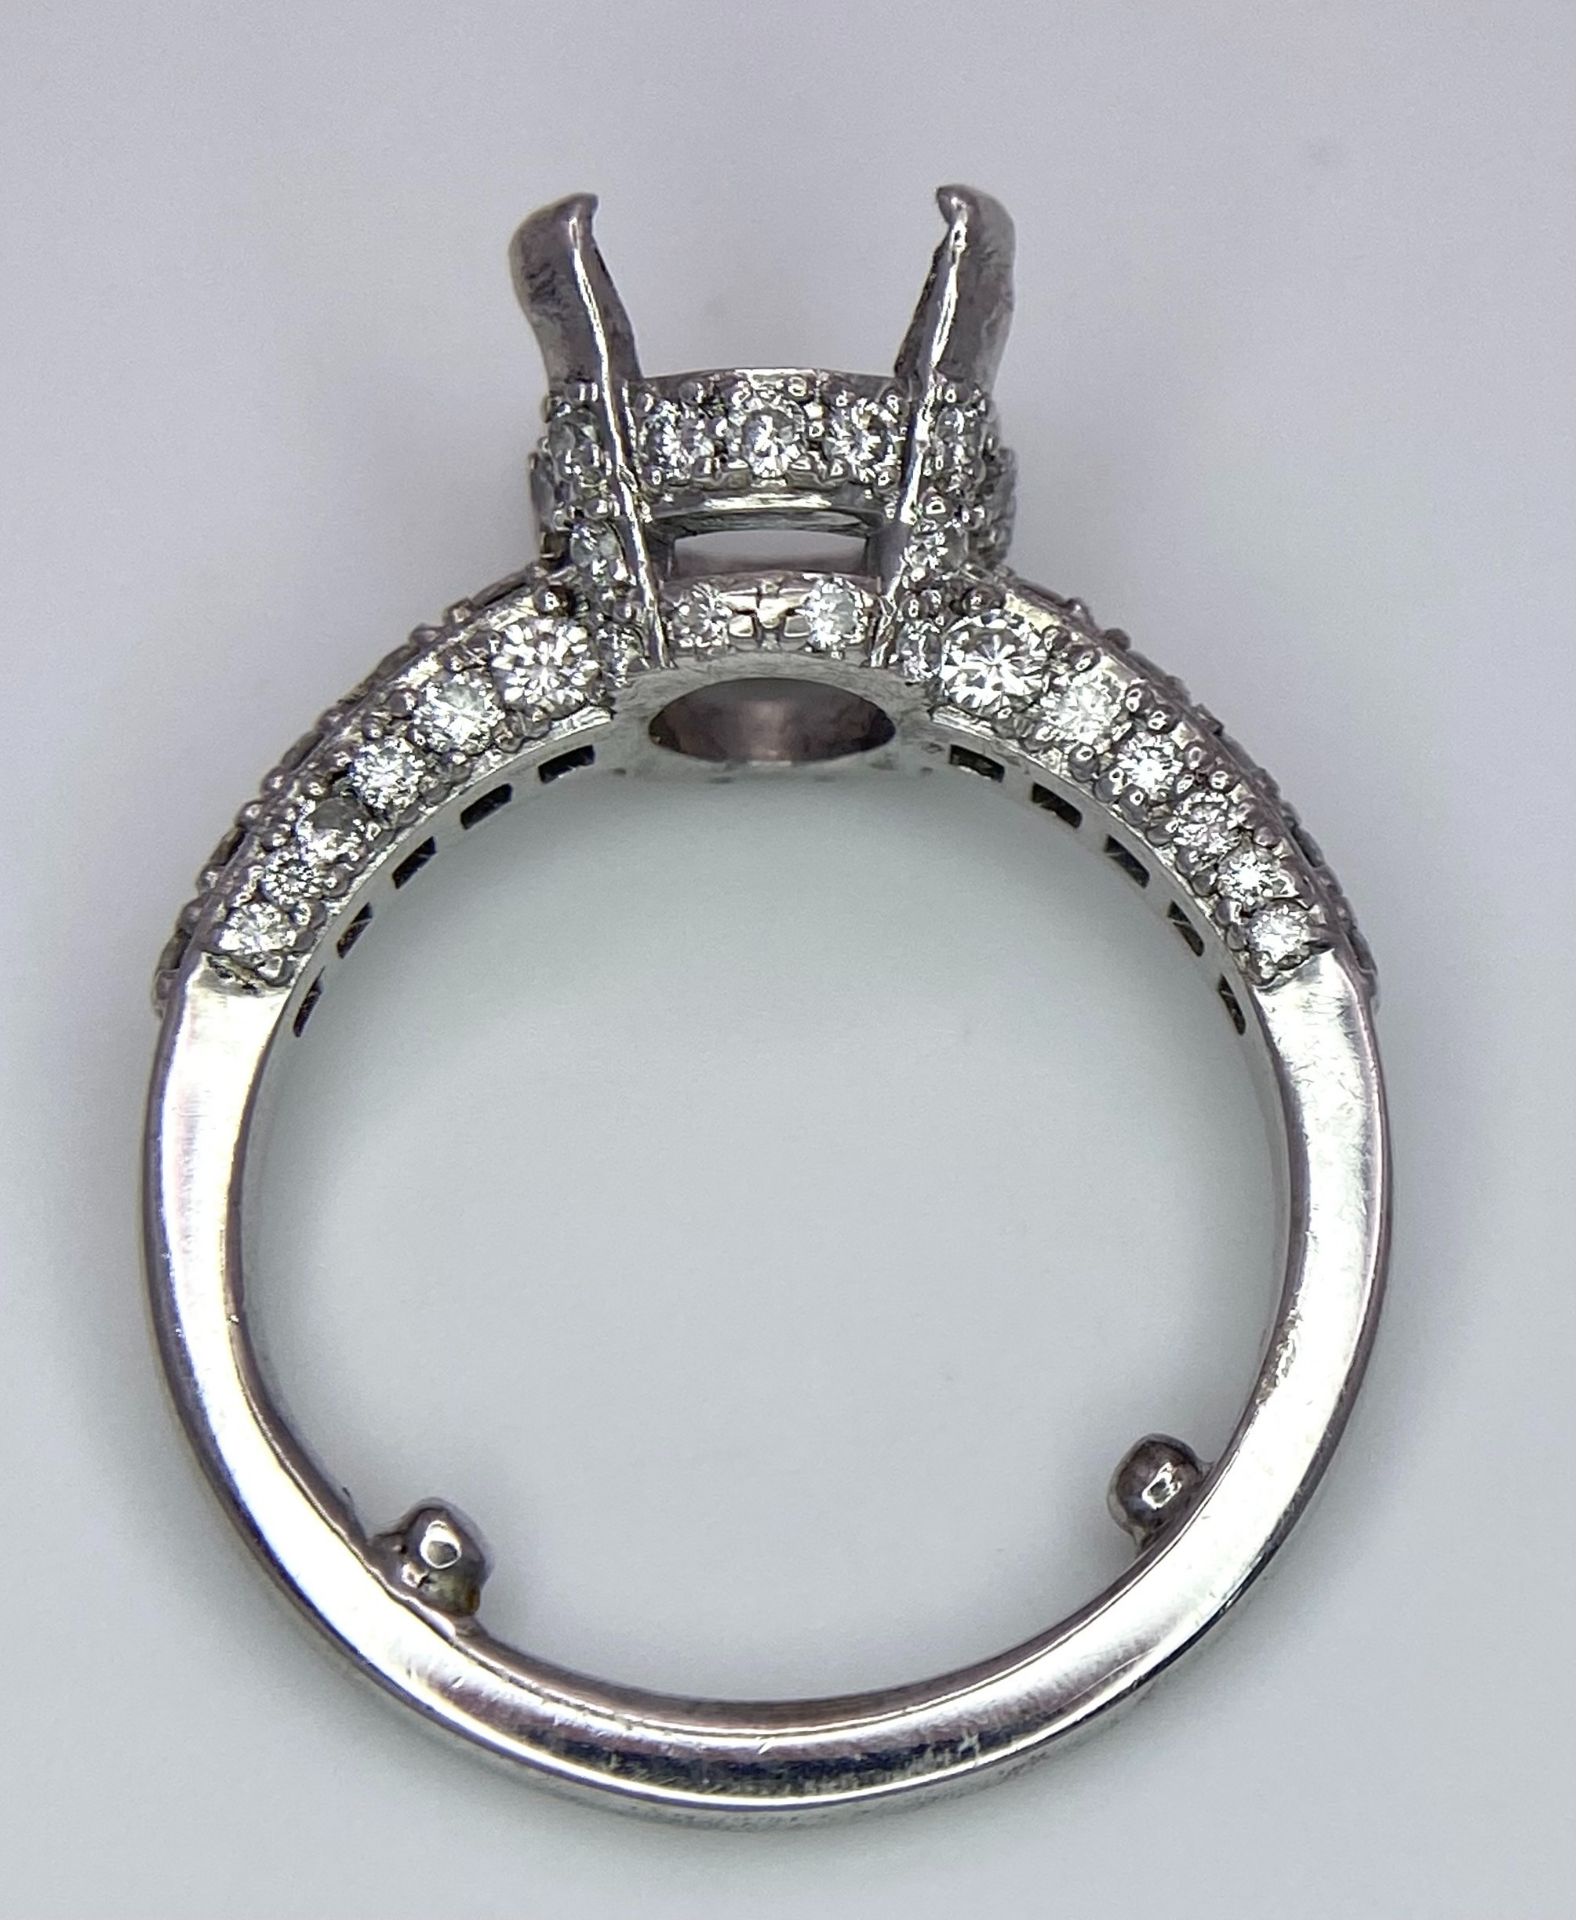 AN 18K WHITE GOLD 4 CLAW SINGLE STONE RING WITH DIAMOND SET BEZEL, SHOULDERS AND SIDES - Ready to - Image 5 of 6